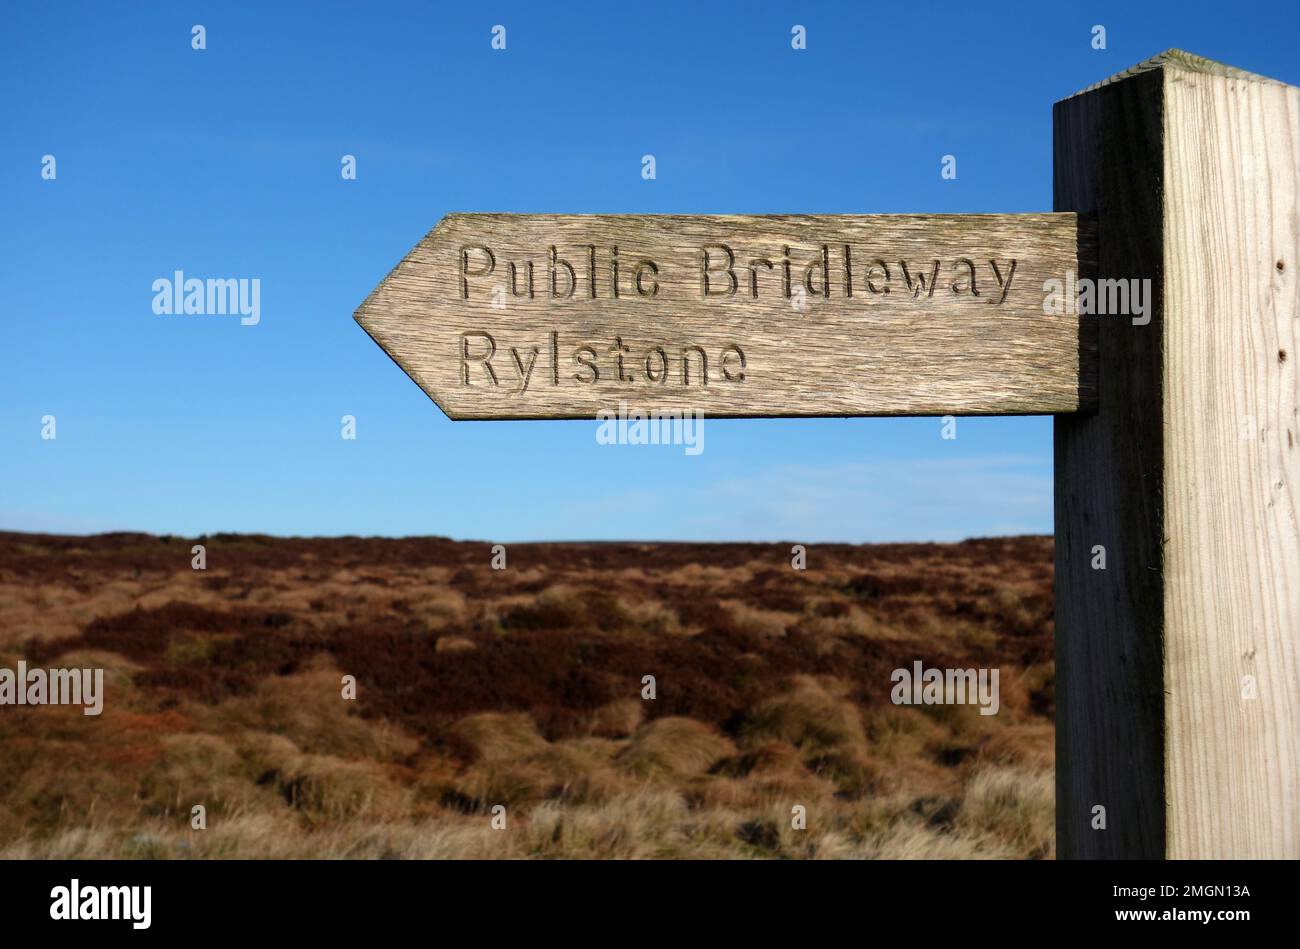 Wooden Signpost for Public Bridleway from Rlystone to Bolton Hall in the Yorkshire Dales National Park, England, UK. Stock Photo